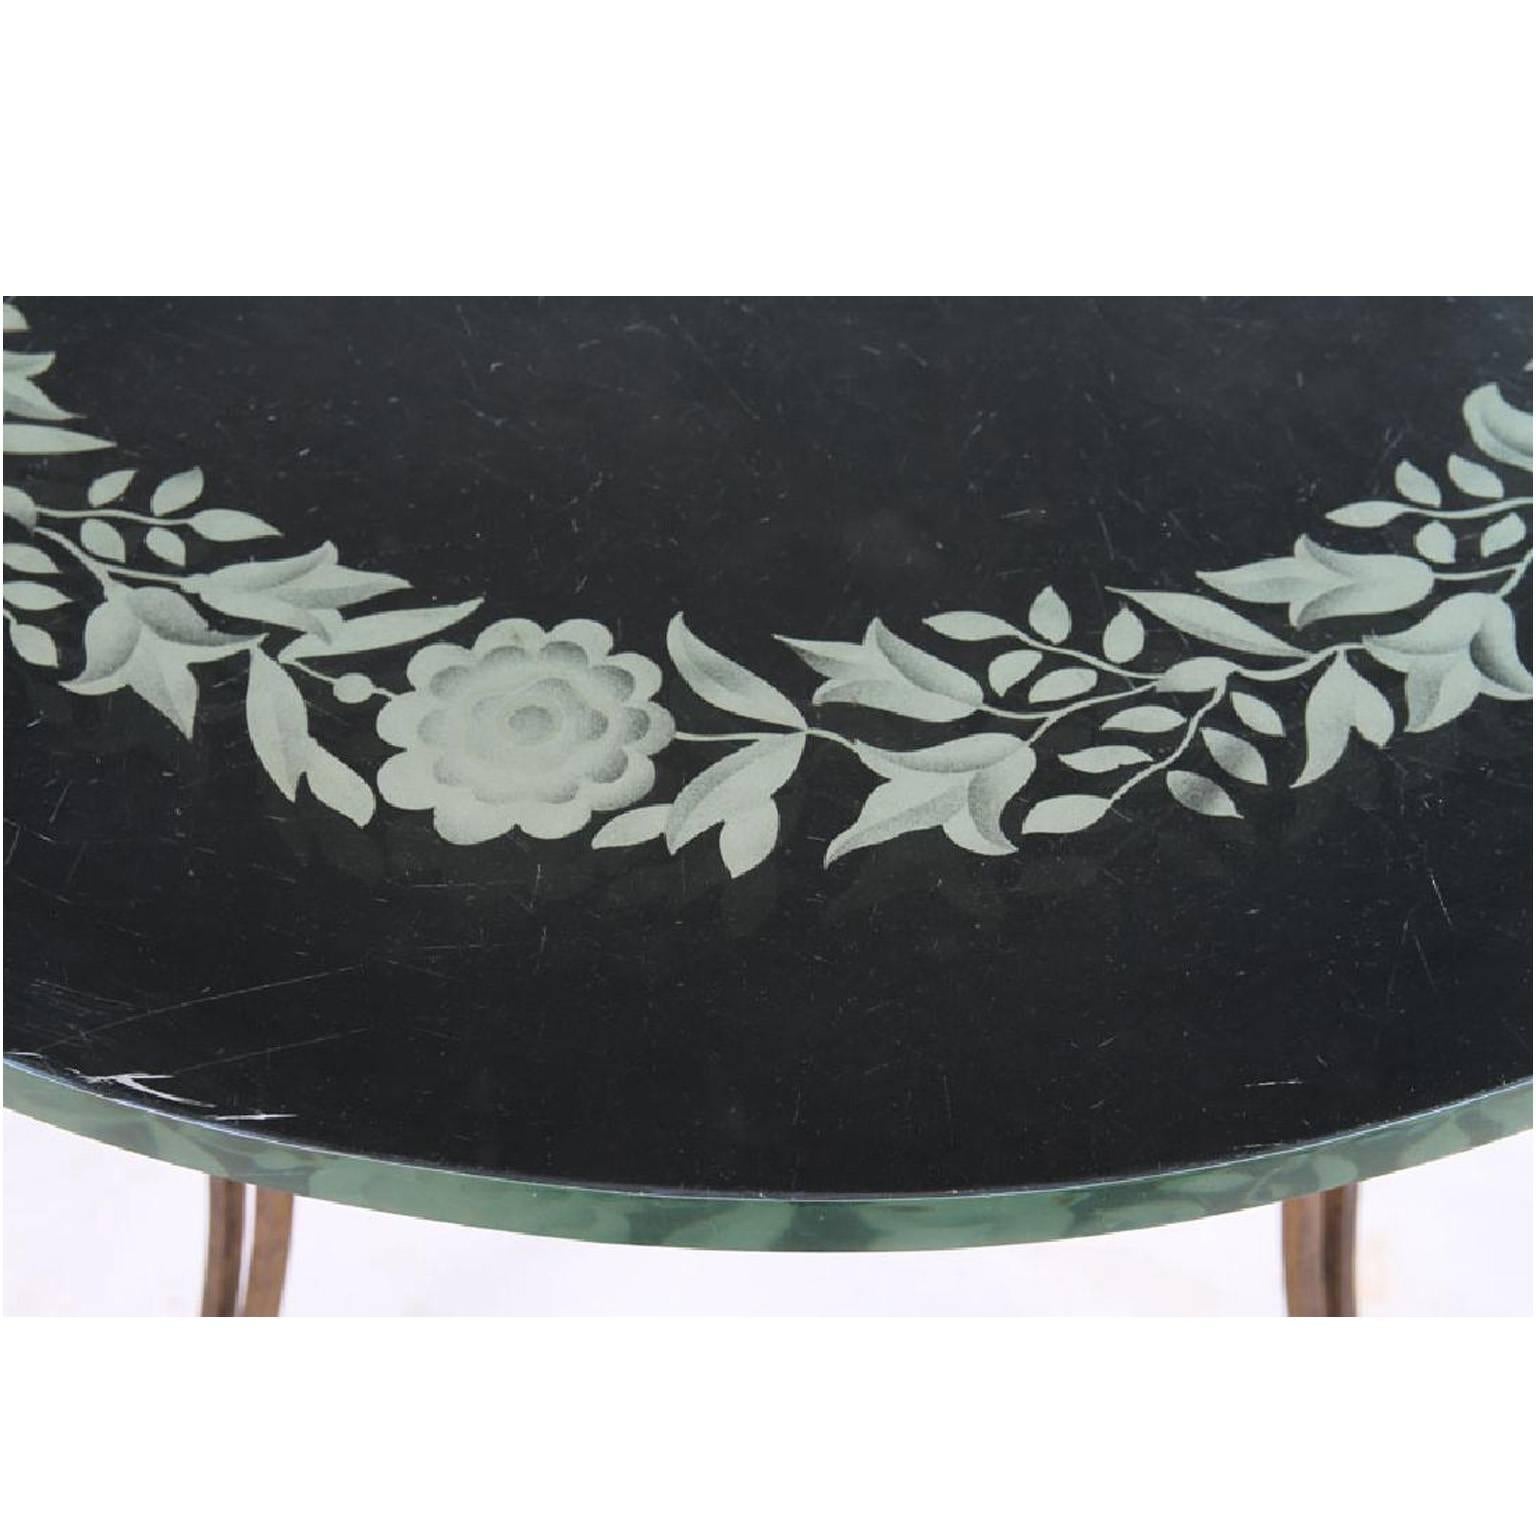 Art Deco French Mirrored Coffee Table, style of Rene Drouet with Wrought Iron Base For Sale